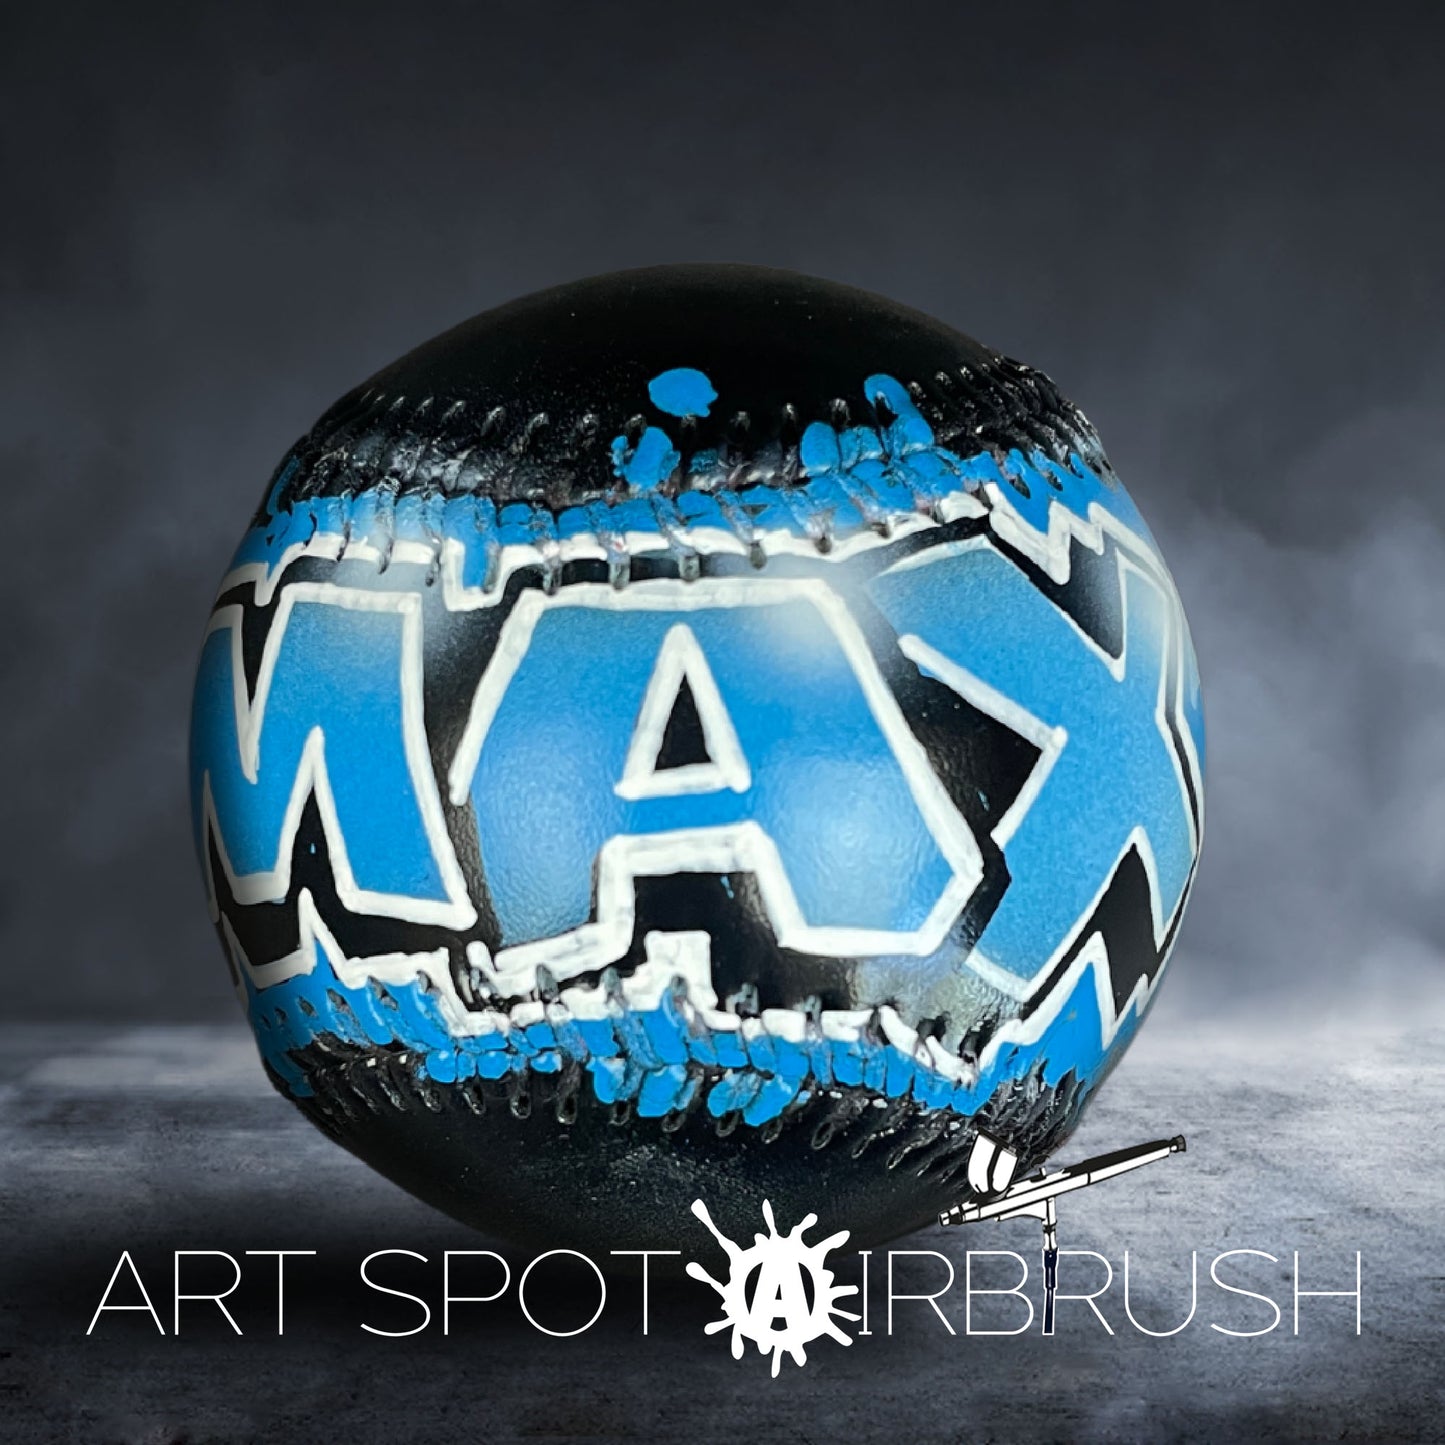 Personalized Baseball with Name in Graffiti